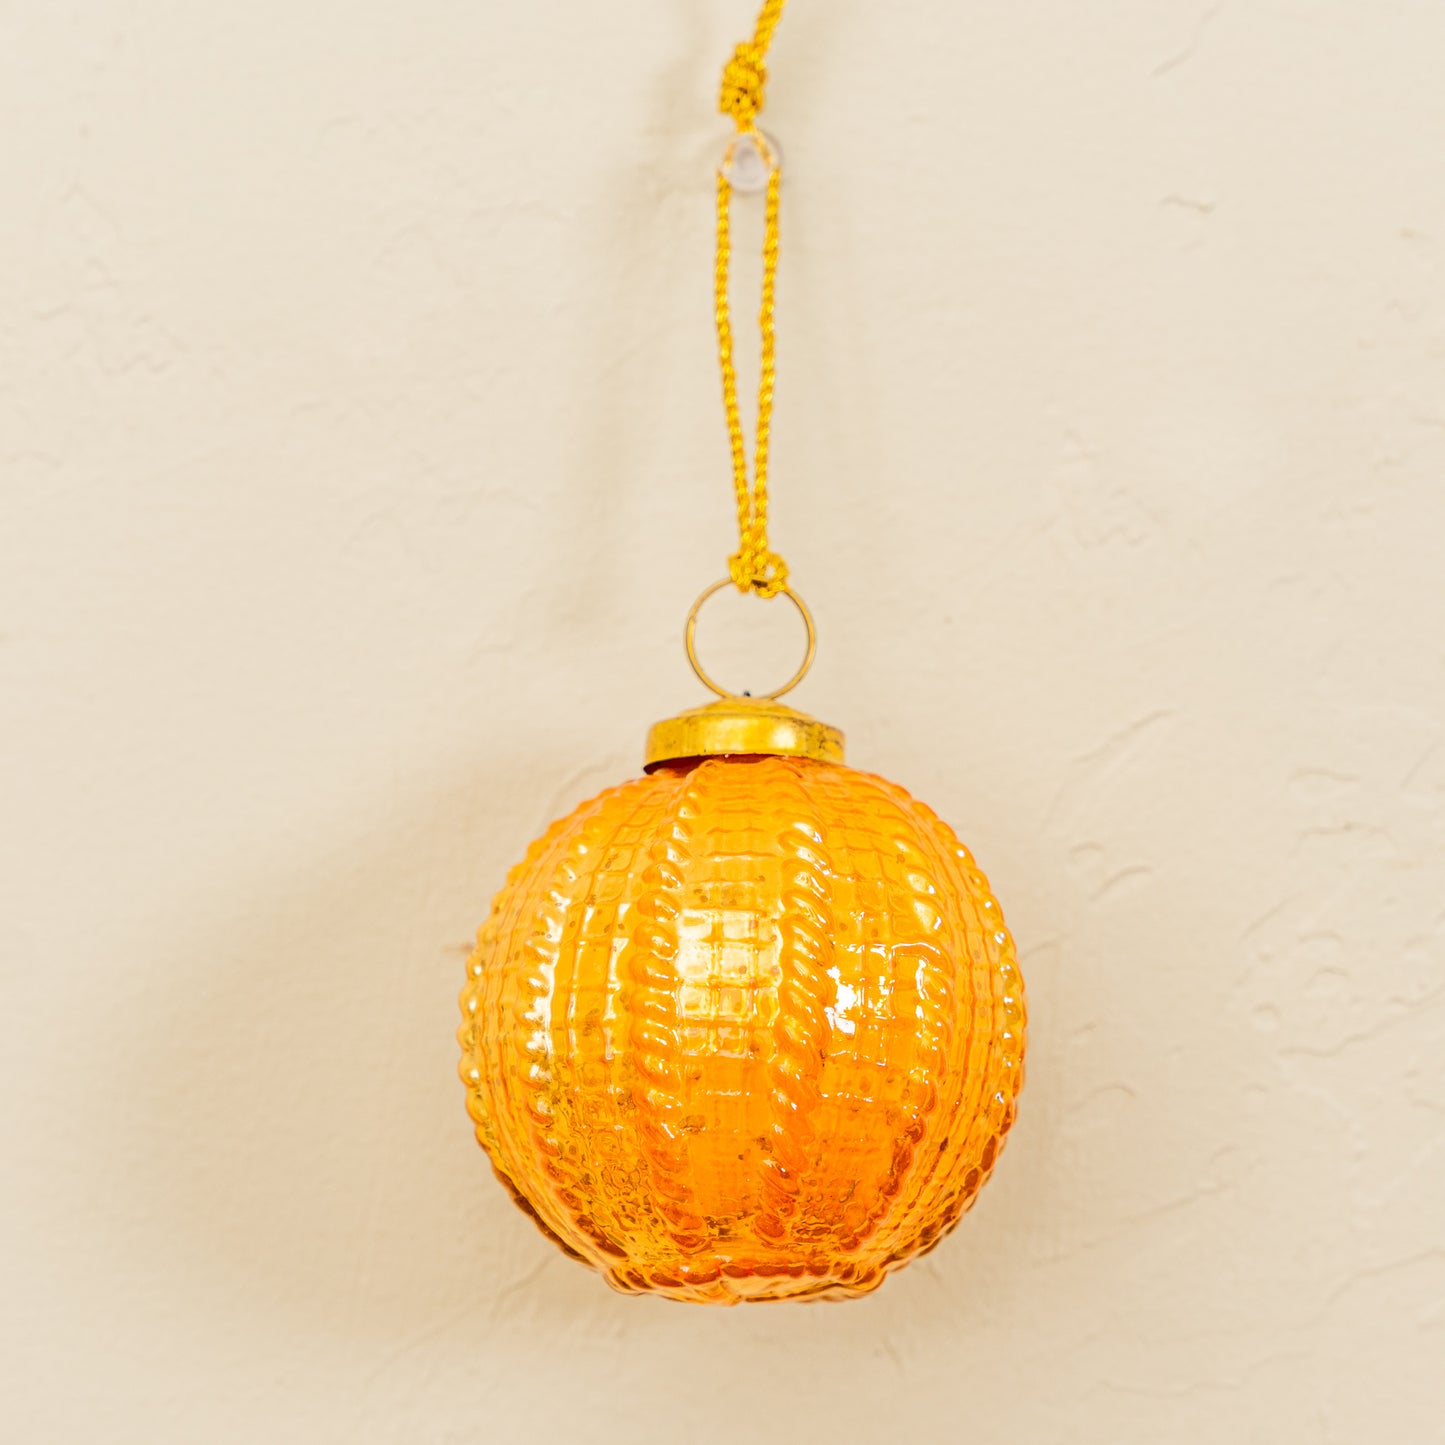 Embossed Glass Ball Ornaments, Set of 3